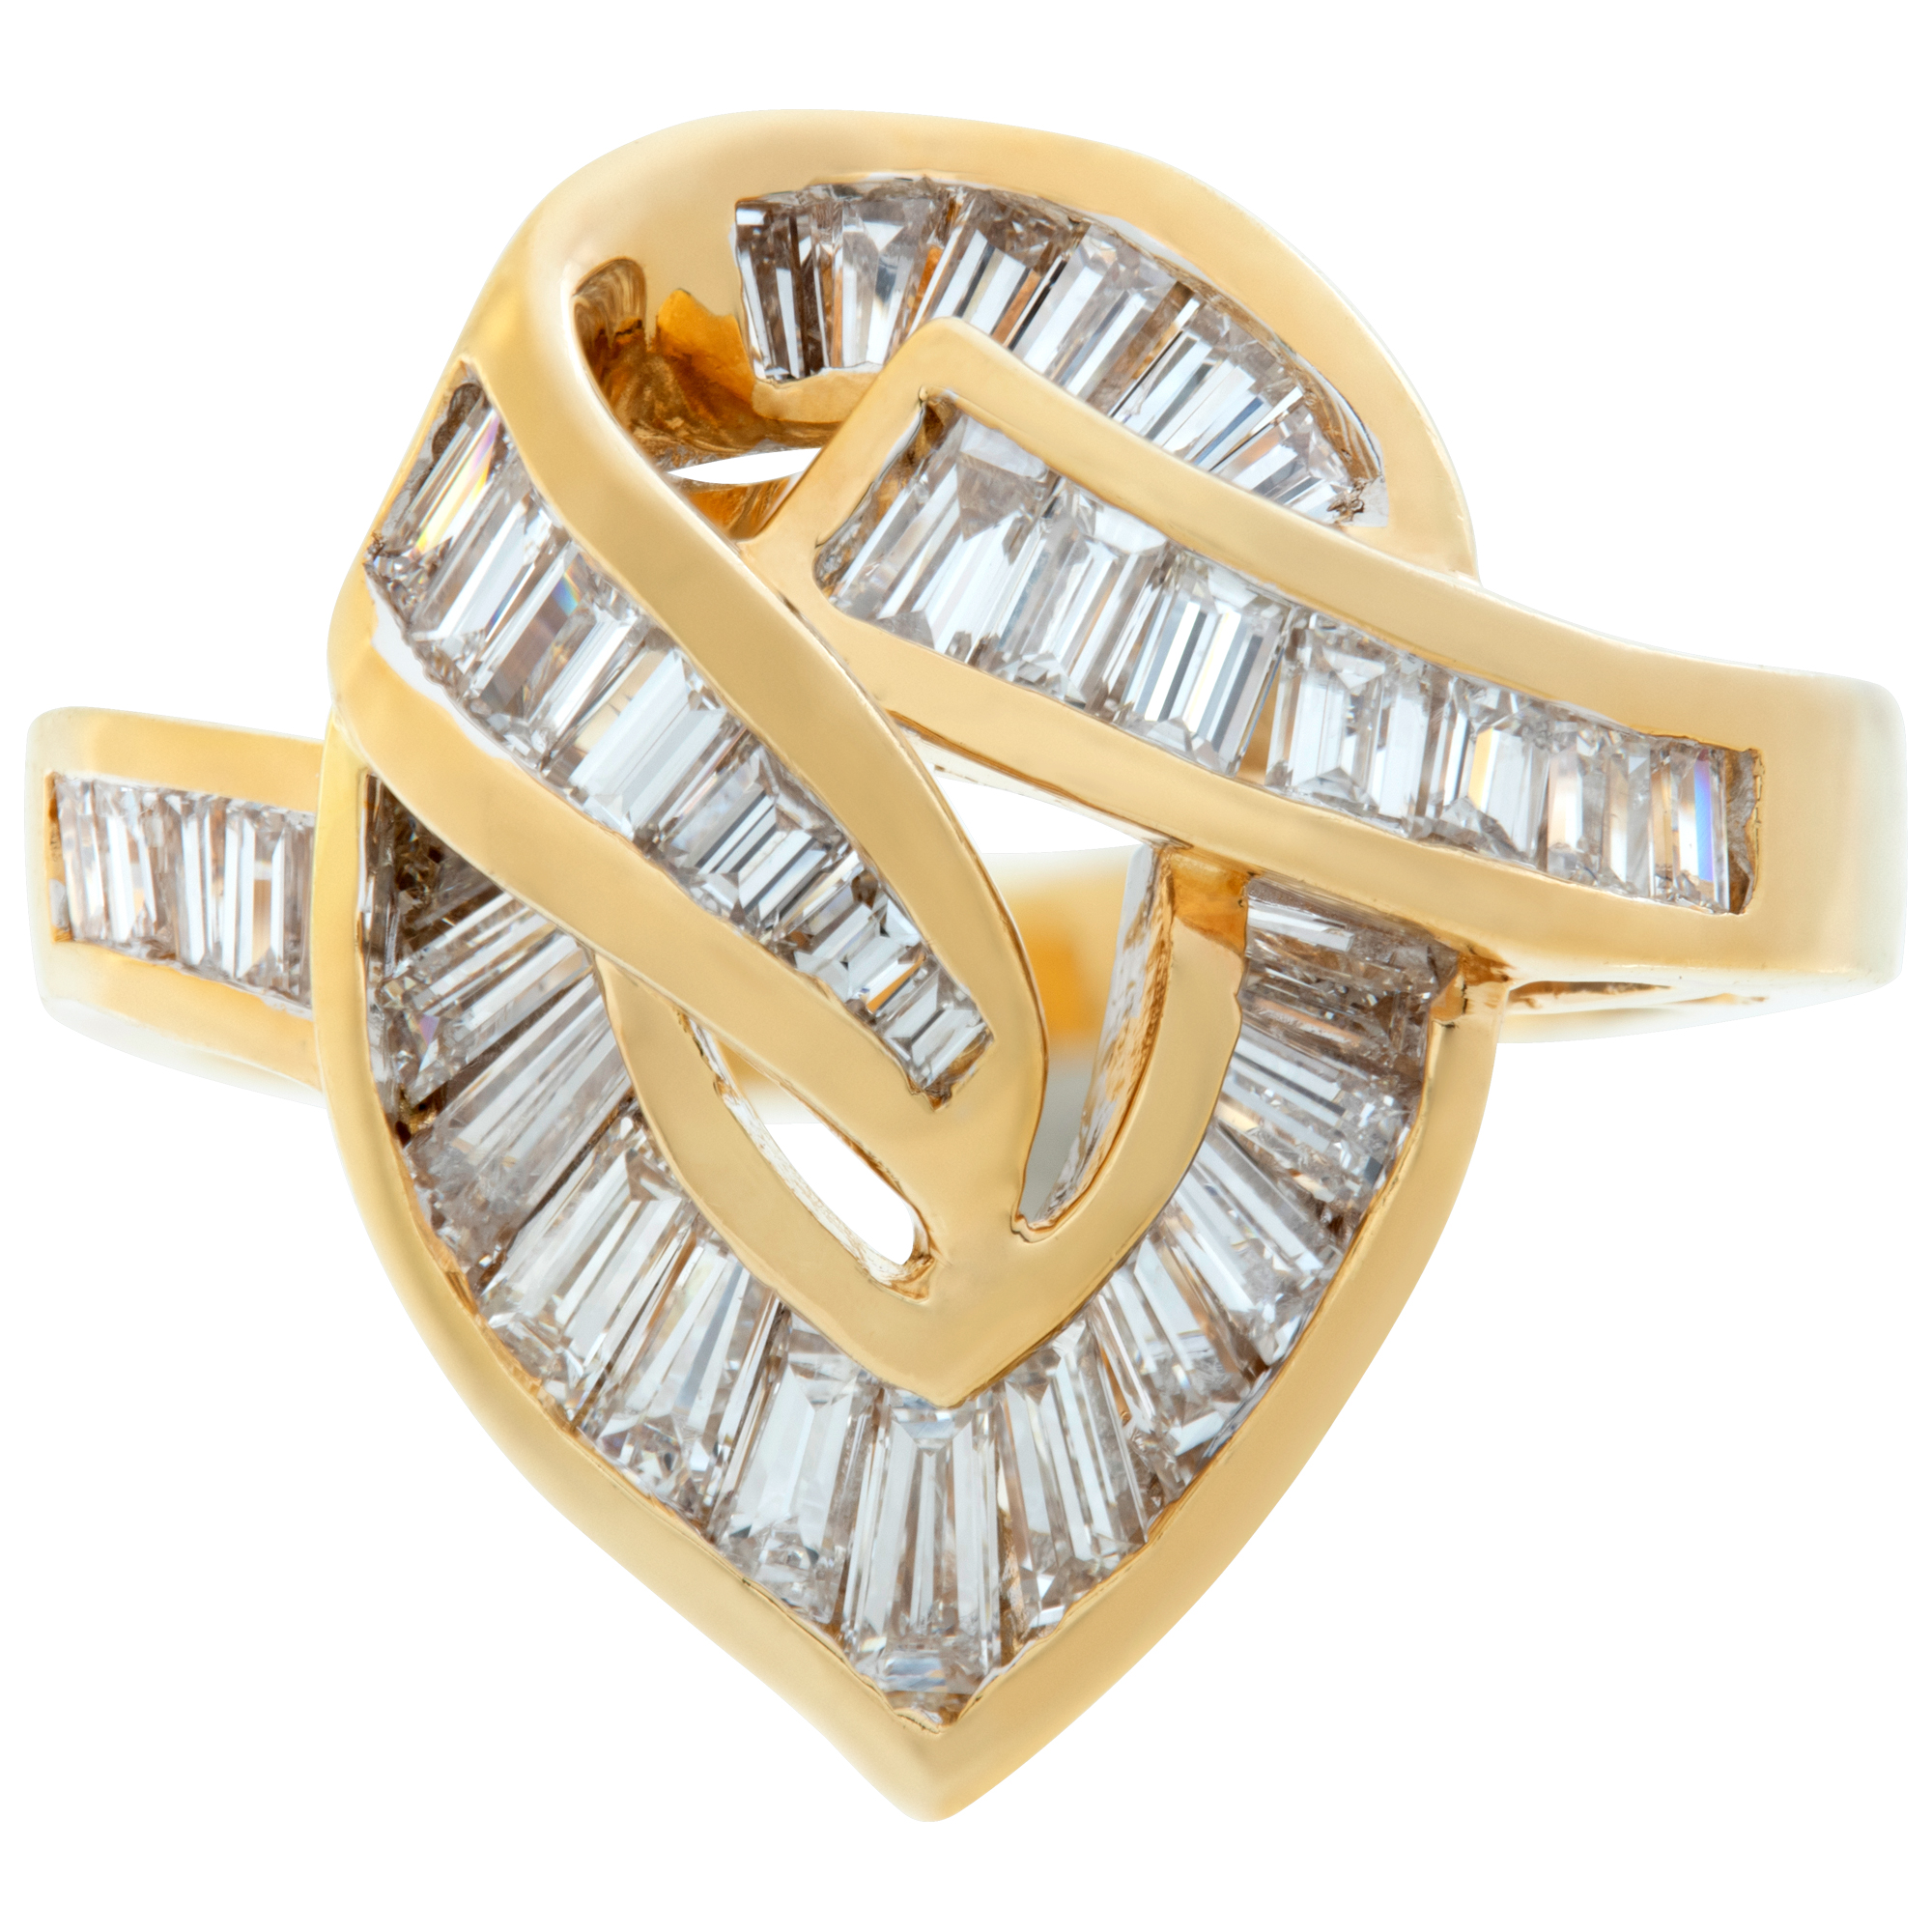 18k yellow gold swirl of diamonds ring with approximately 3 carats in baguette